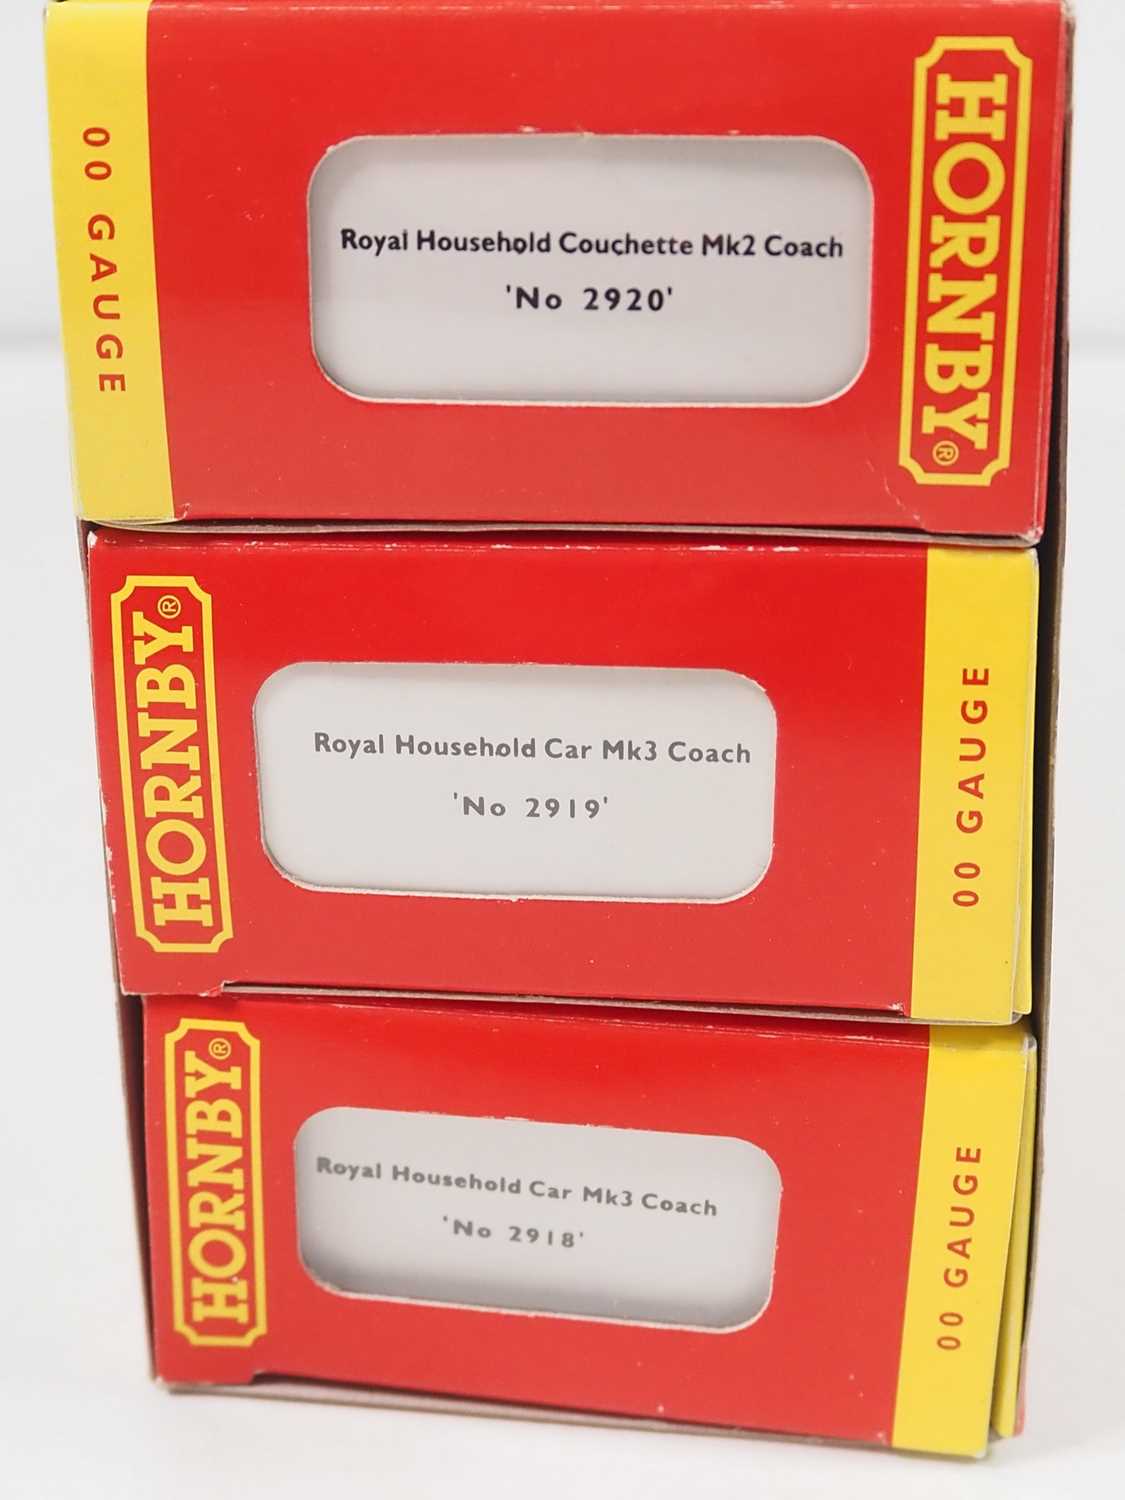 A HORNBY R4197 OO gauge 'The Royal Train' add-on triple coach pack - VG/E in VG box - Image 3 of 4